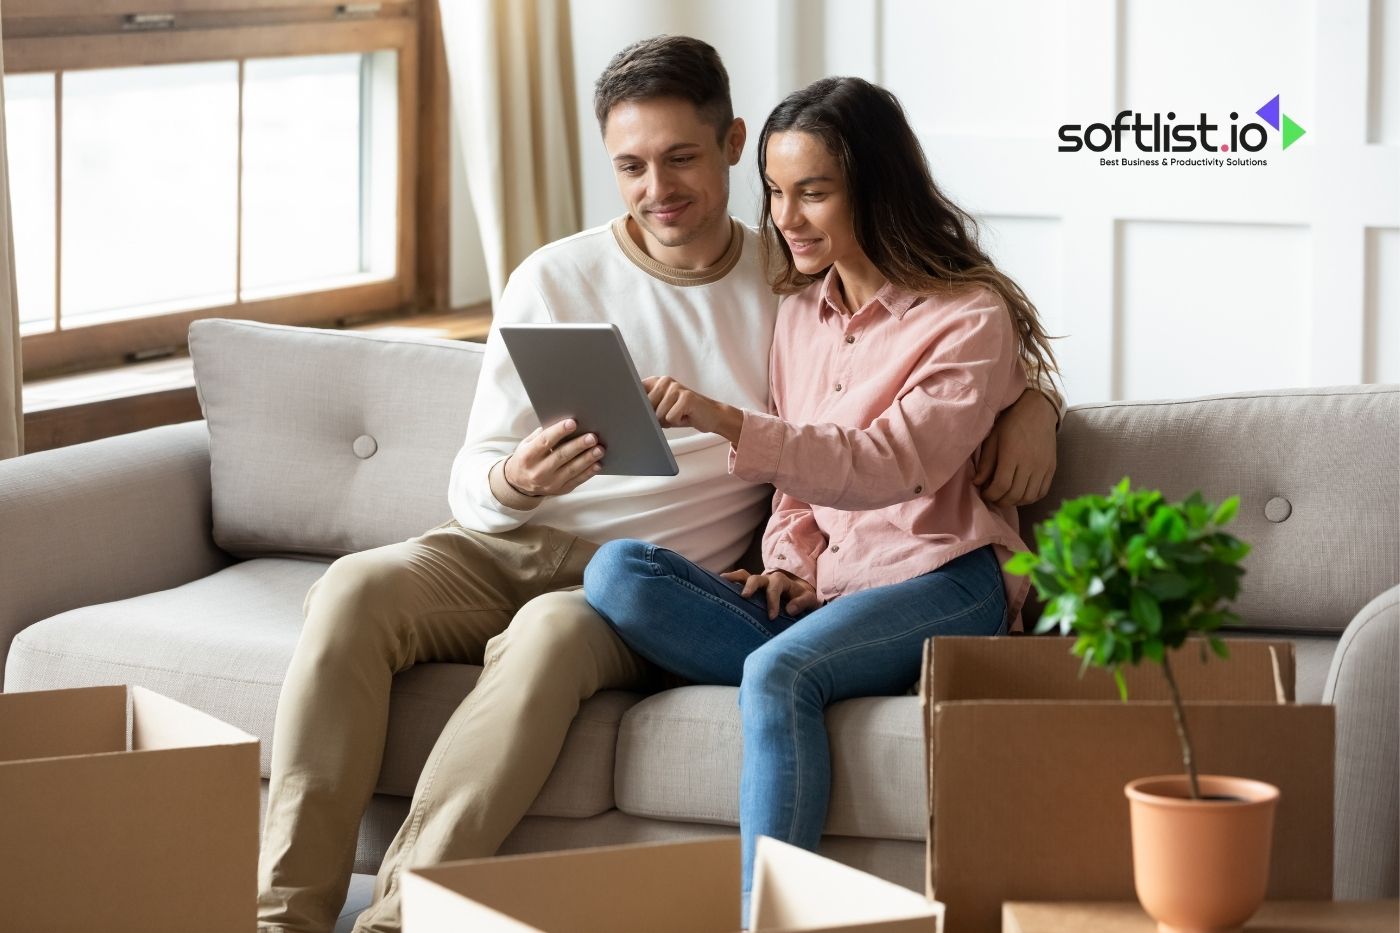 Couple looking at a tablet with softlist.io logo, moving boxes and plant in background.